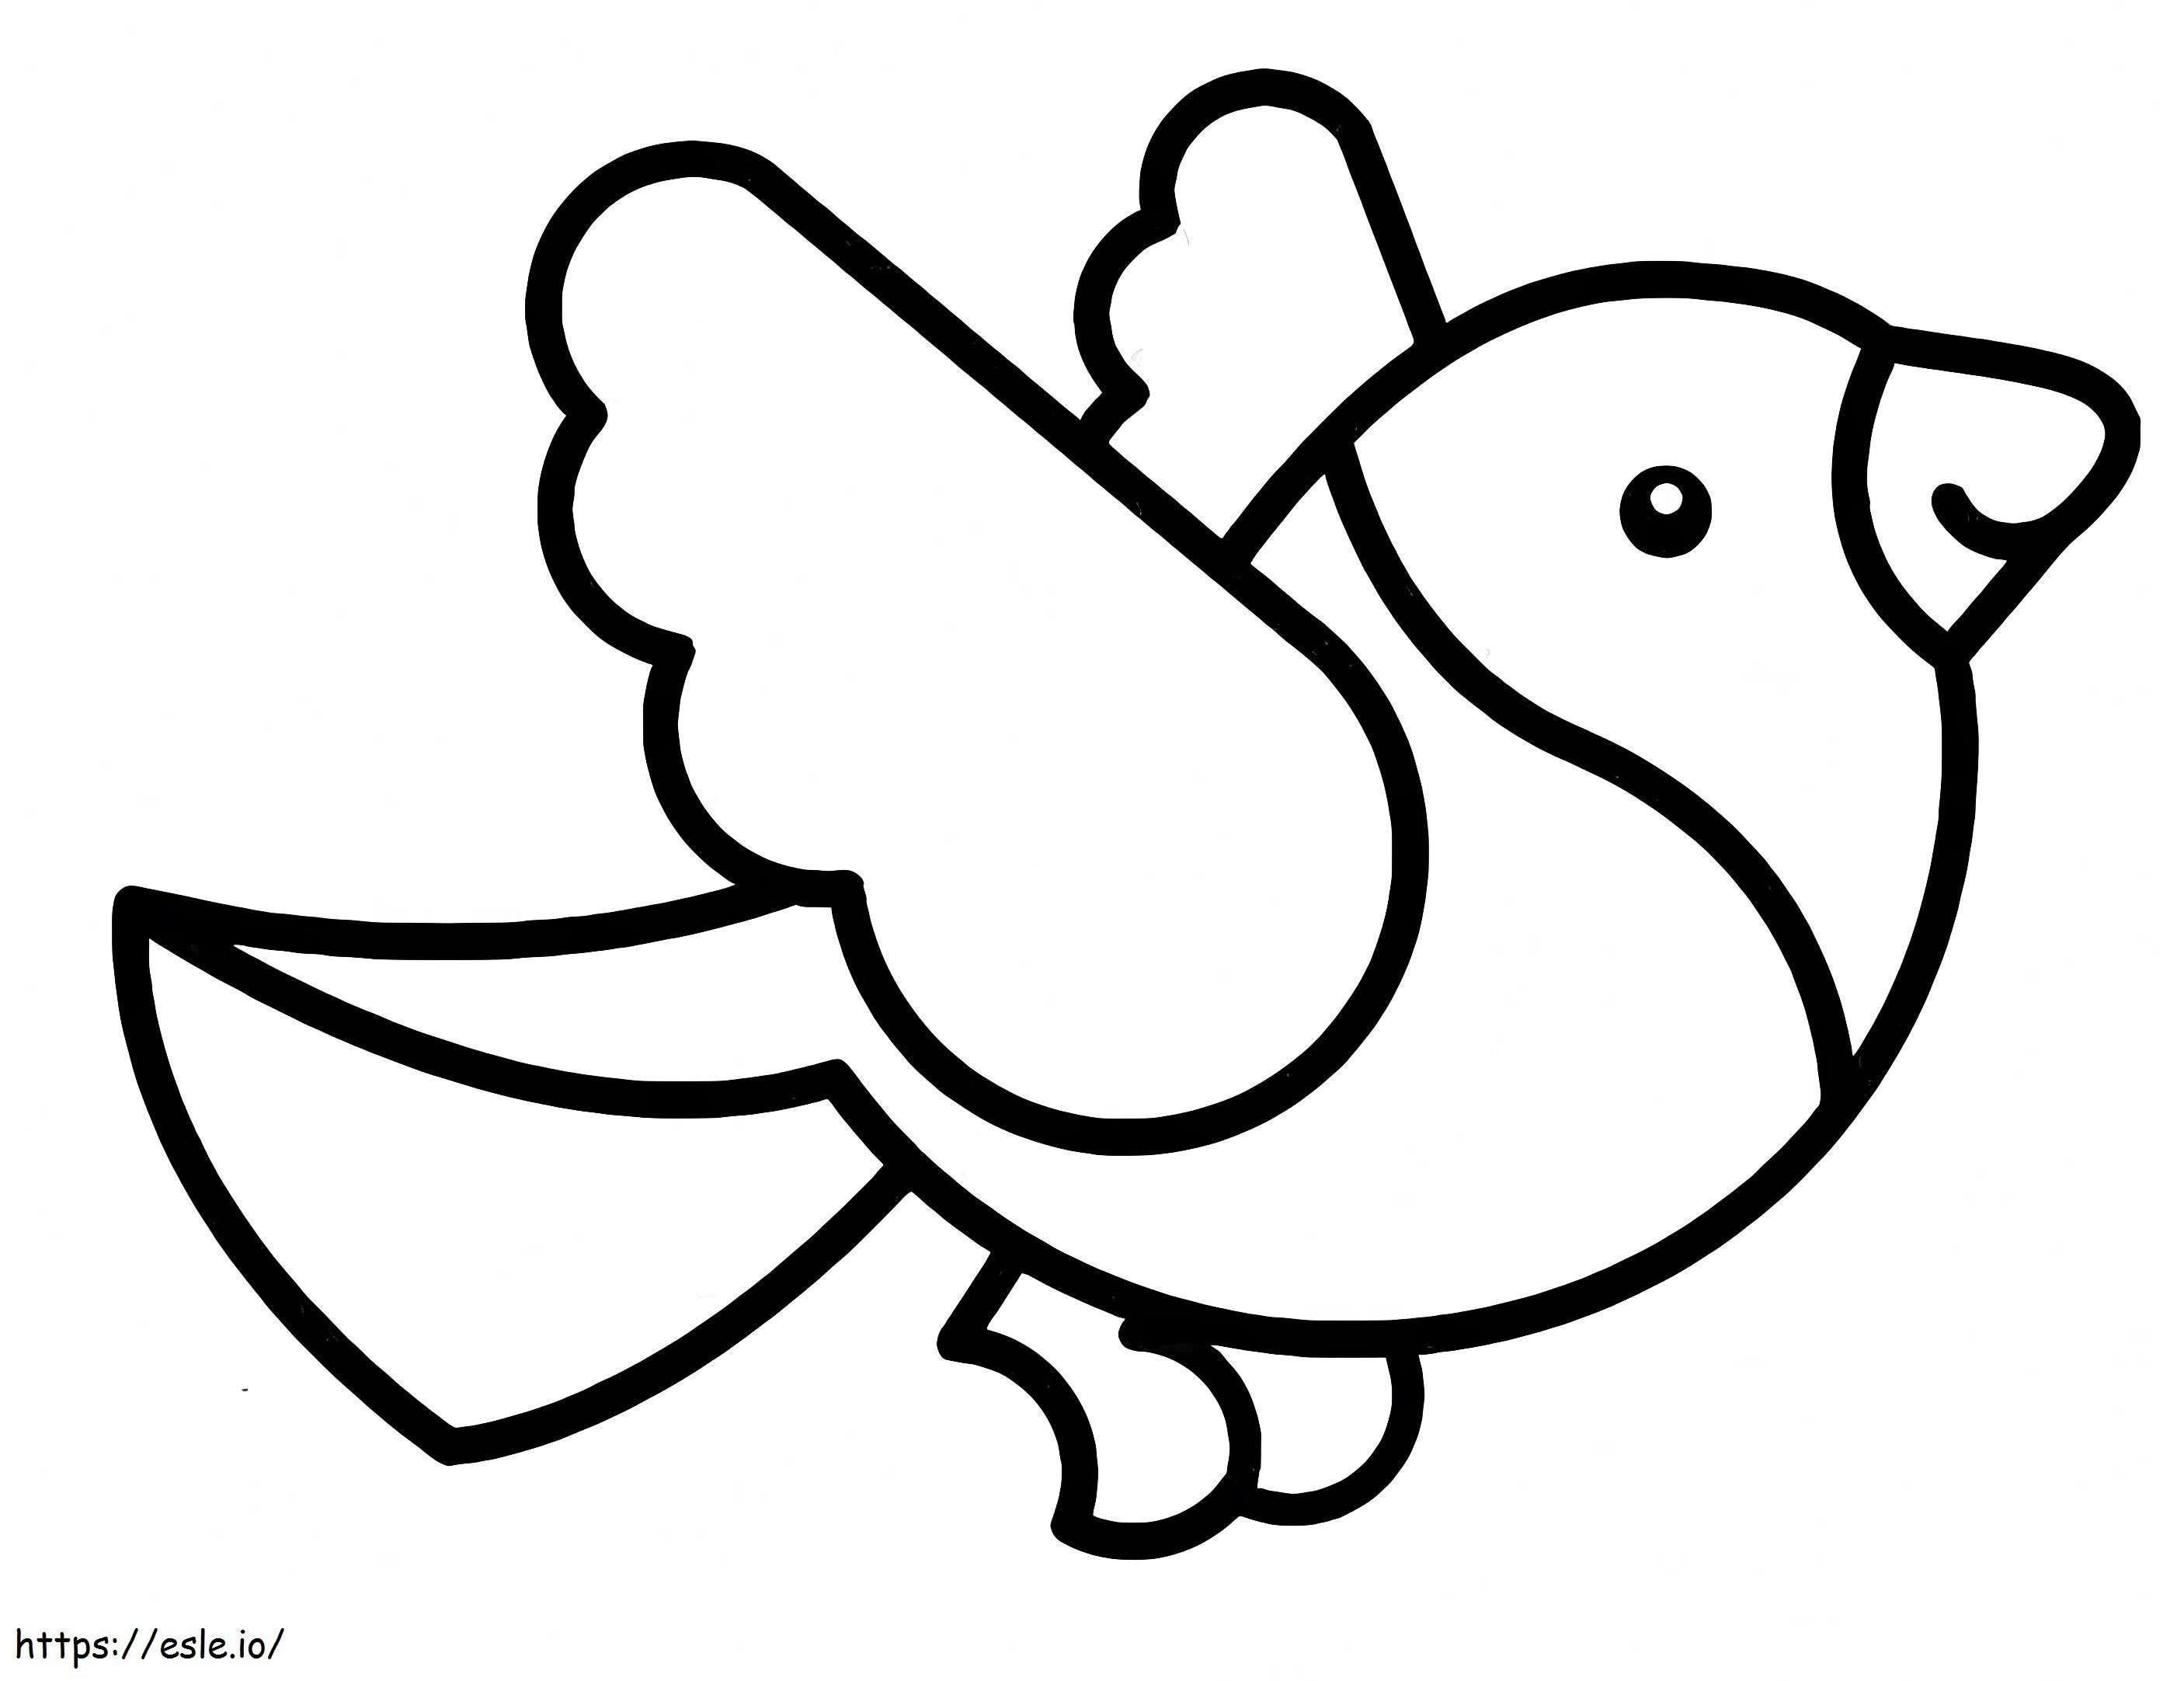 A Flying Bird coloring page